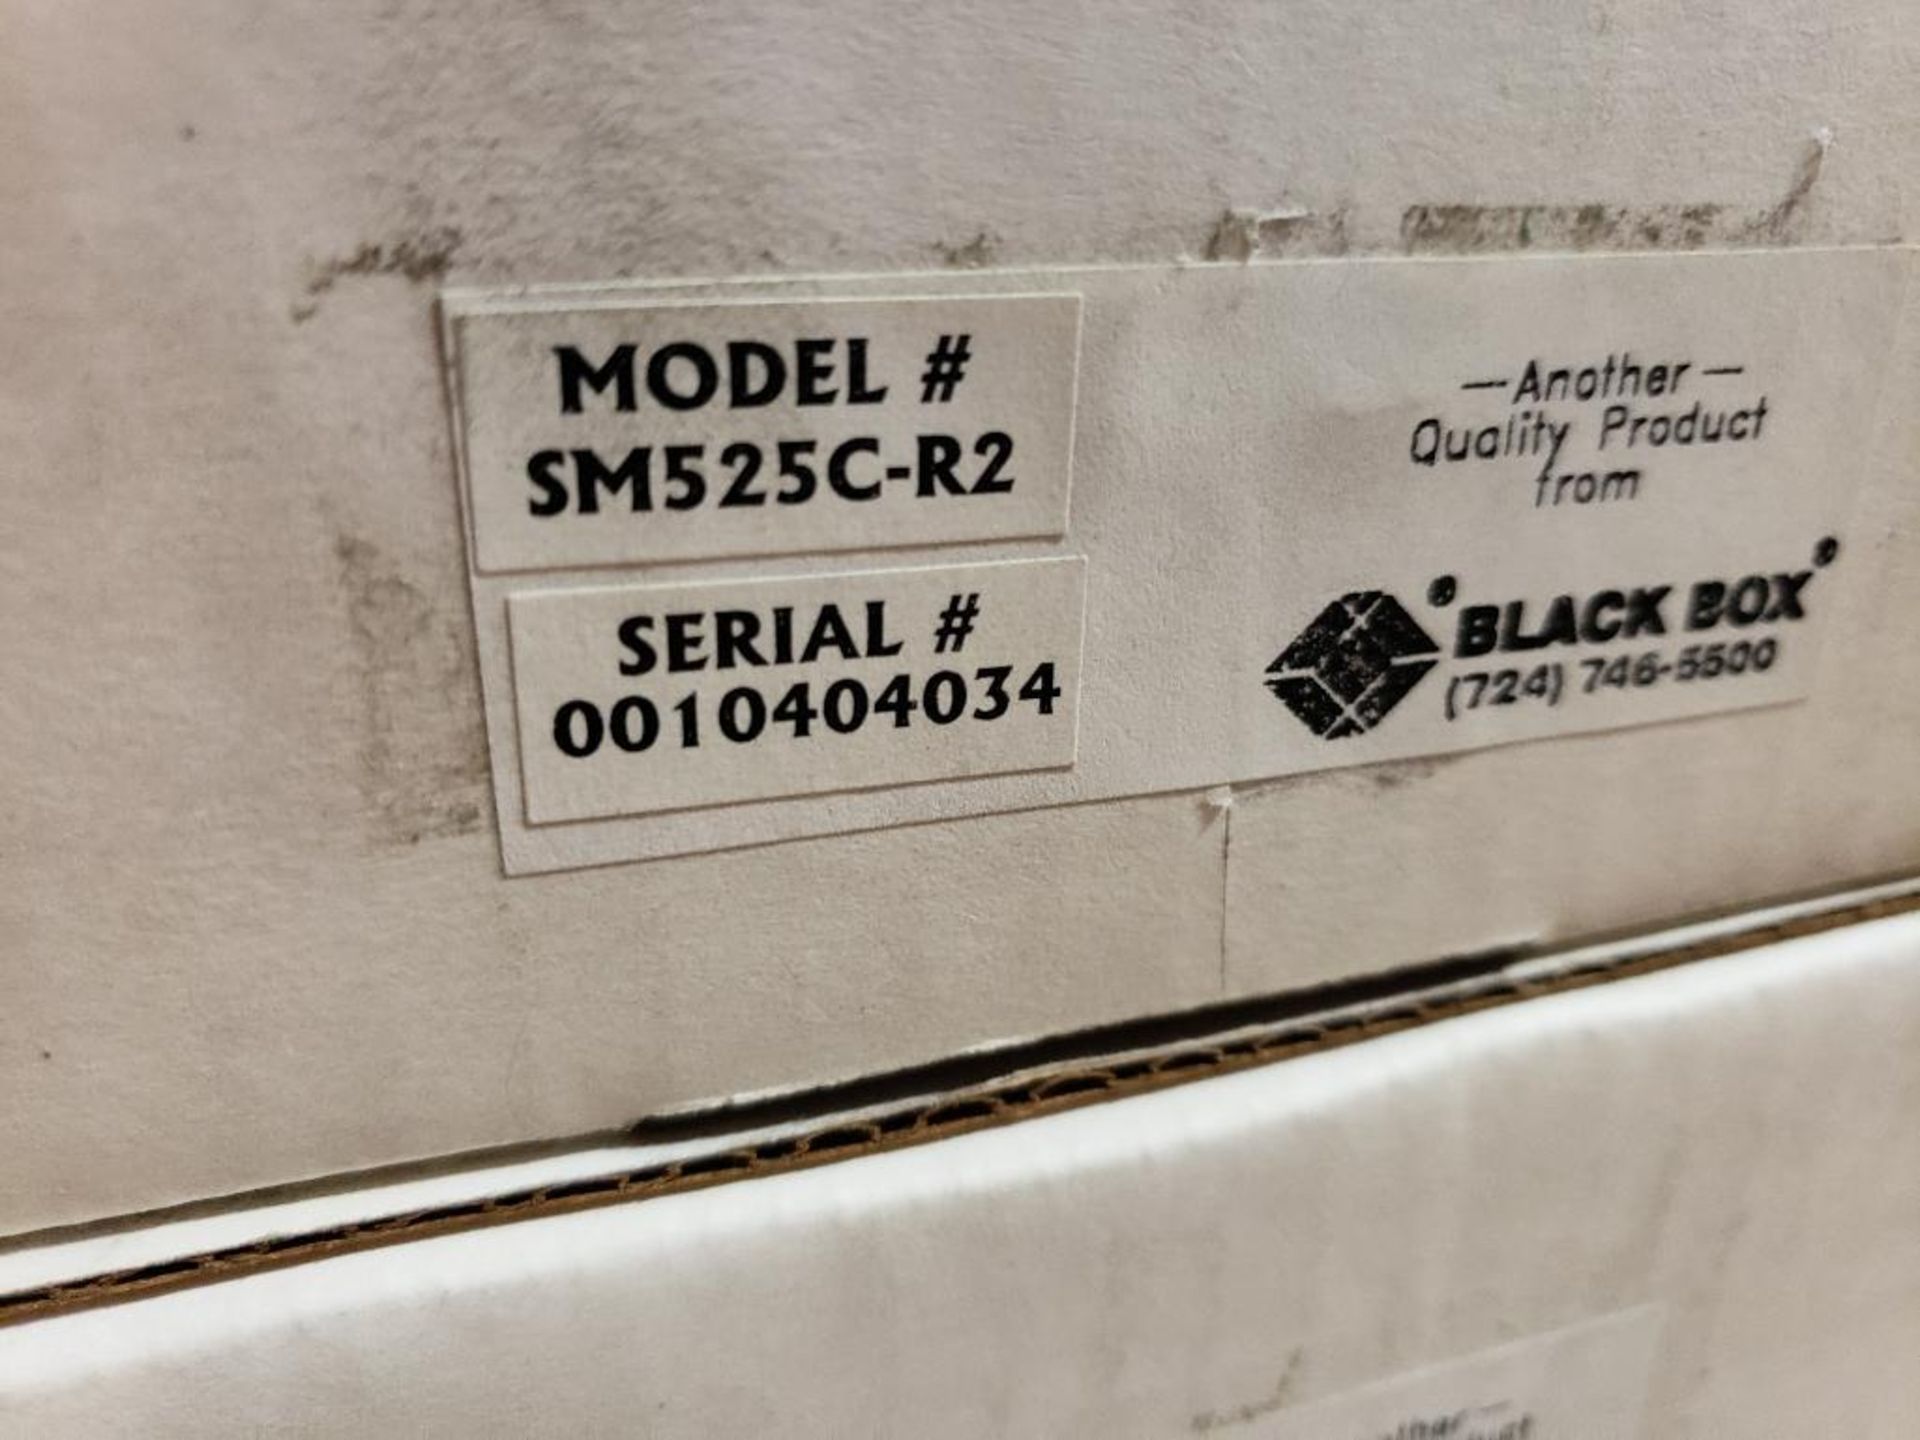 Qty 6 - Black Box. Part number SM525C-R2. New in box. - Image 2 of 3